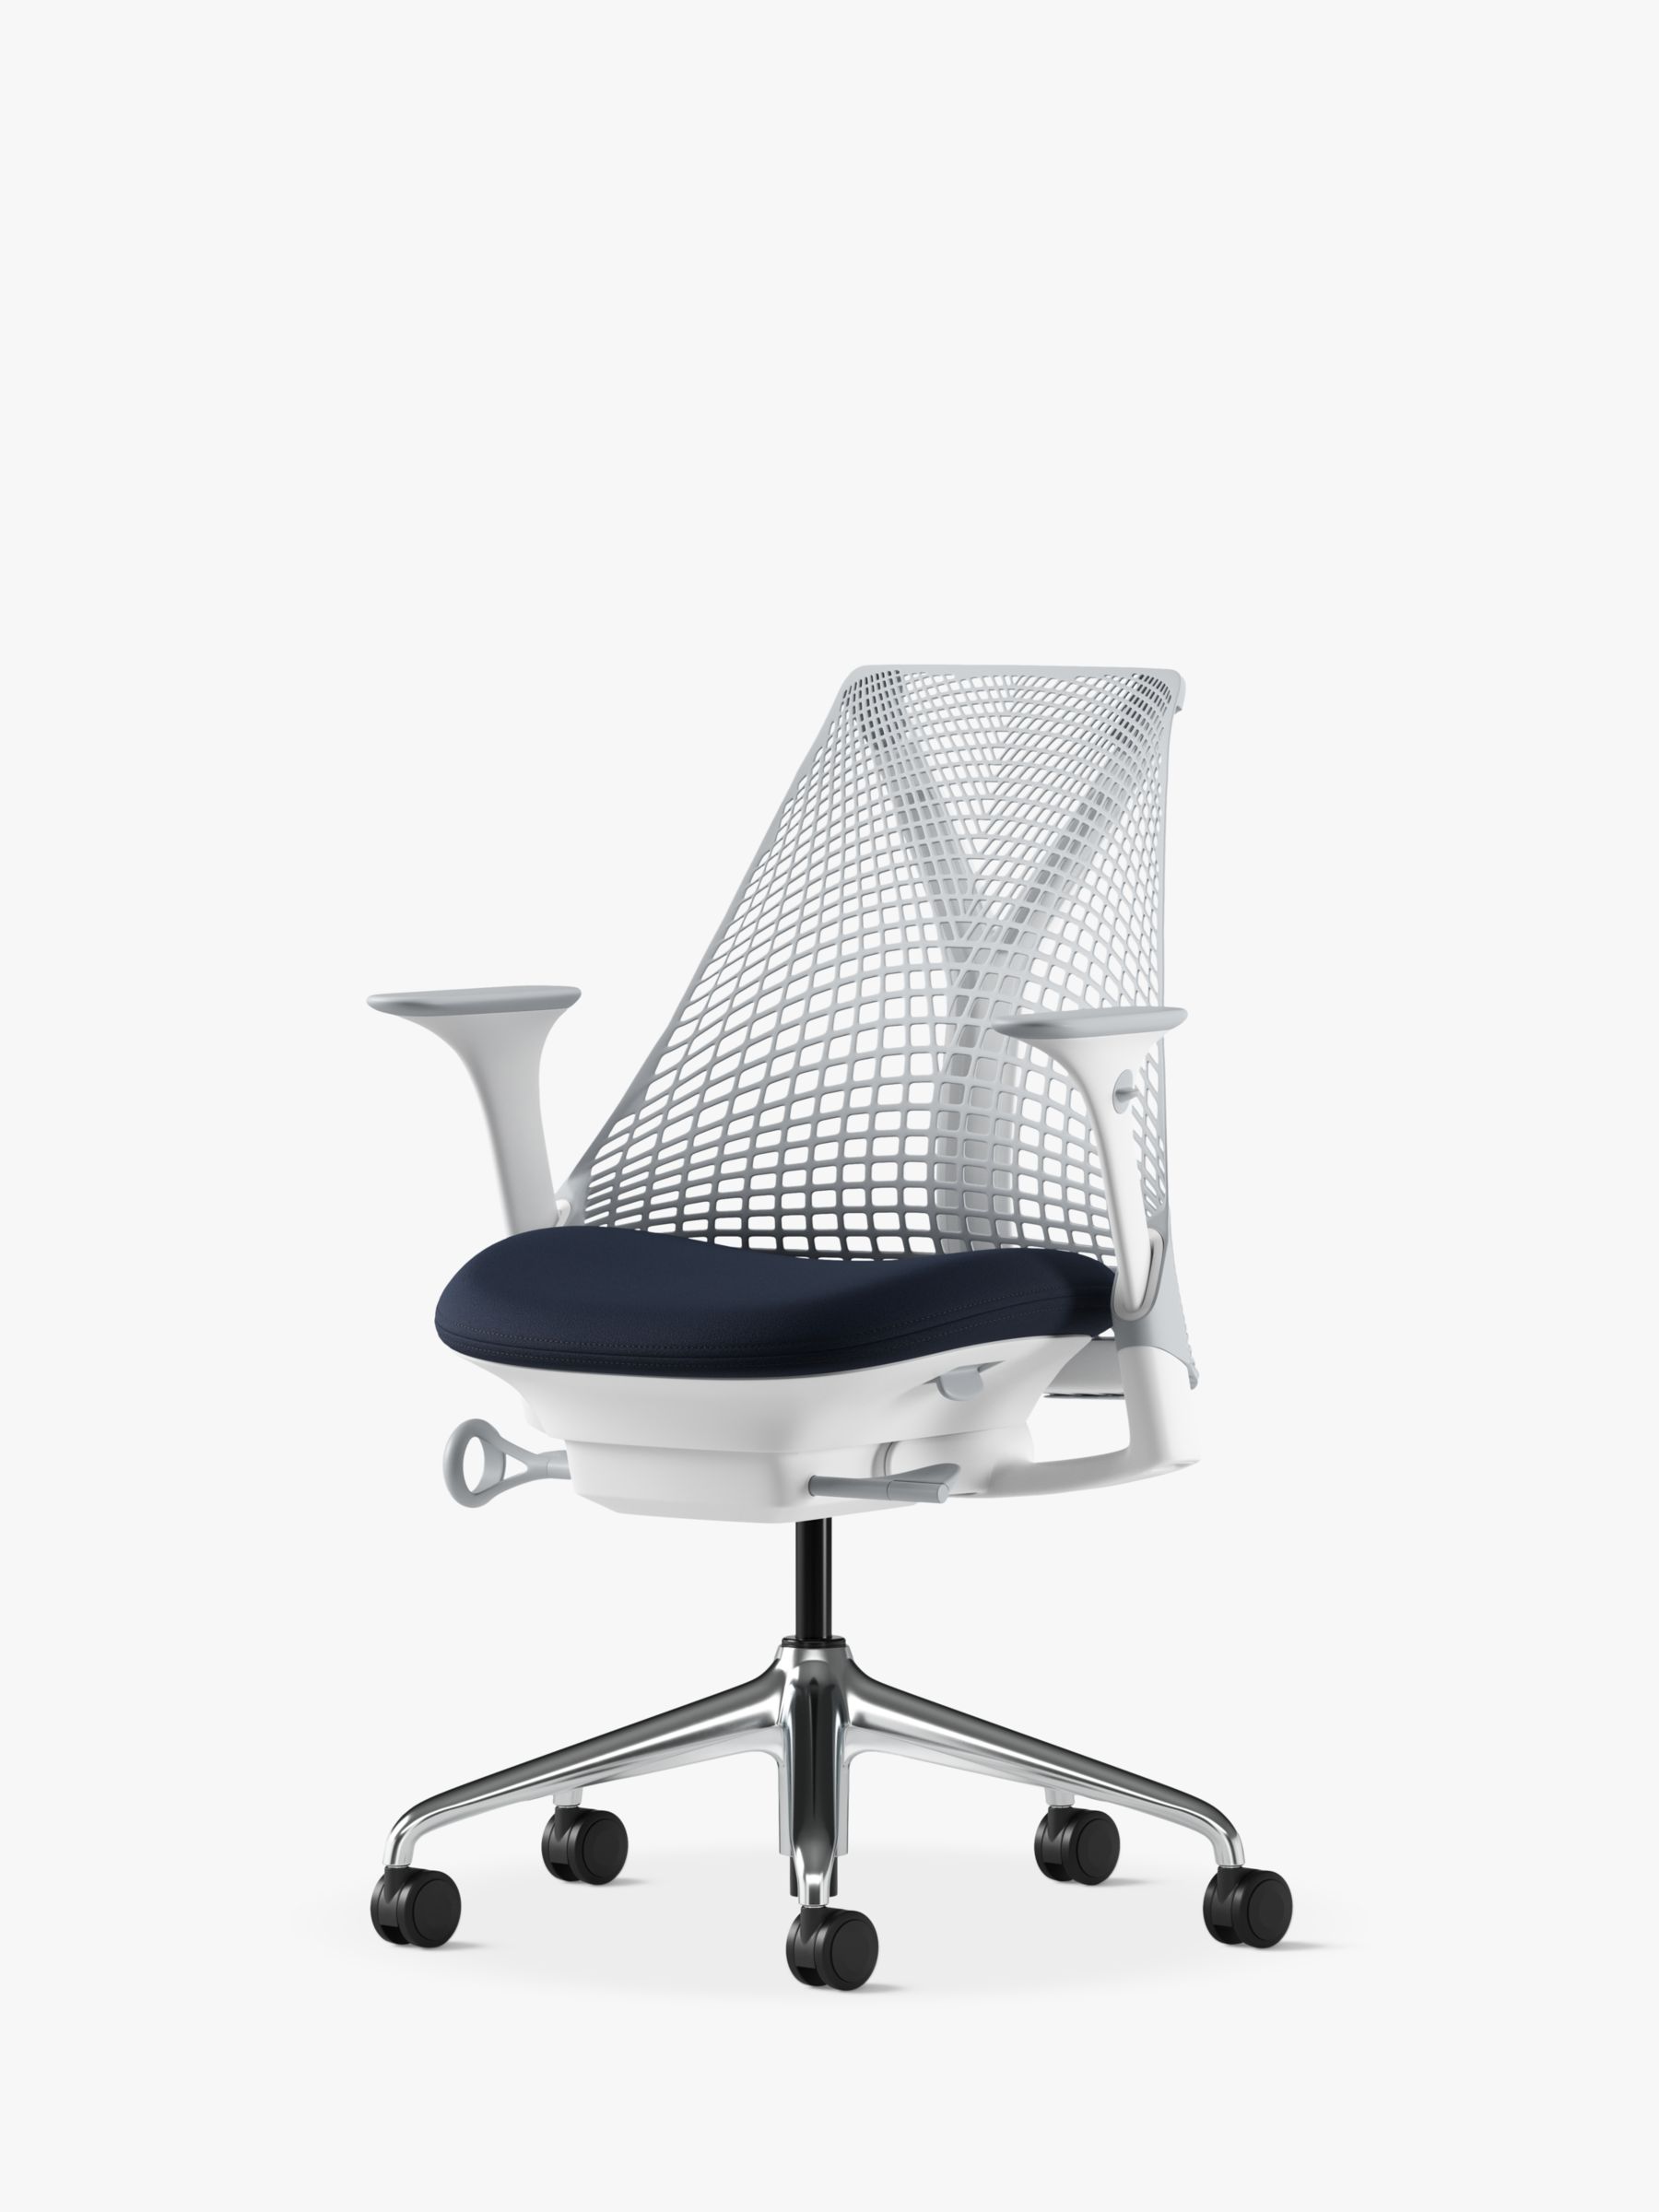 Photo of Herman miller sayl office chair